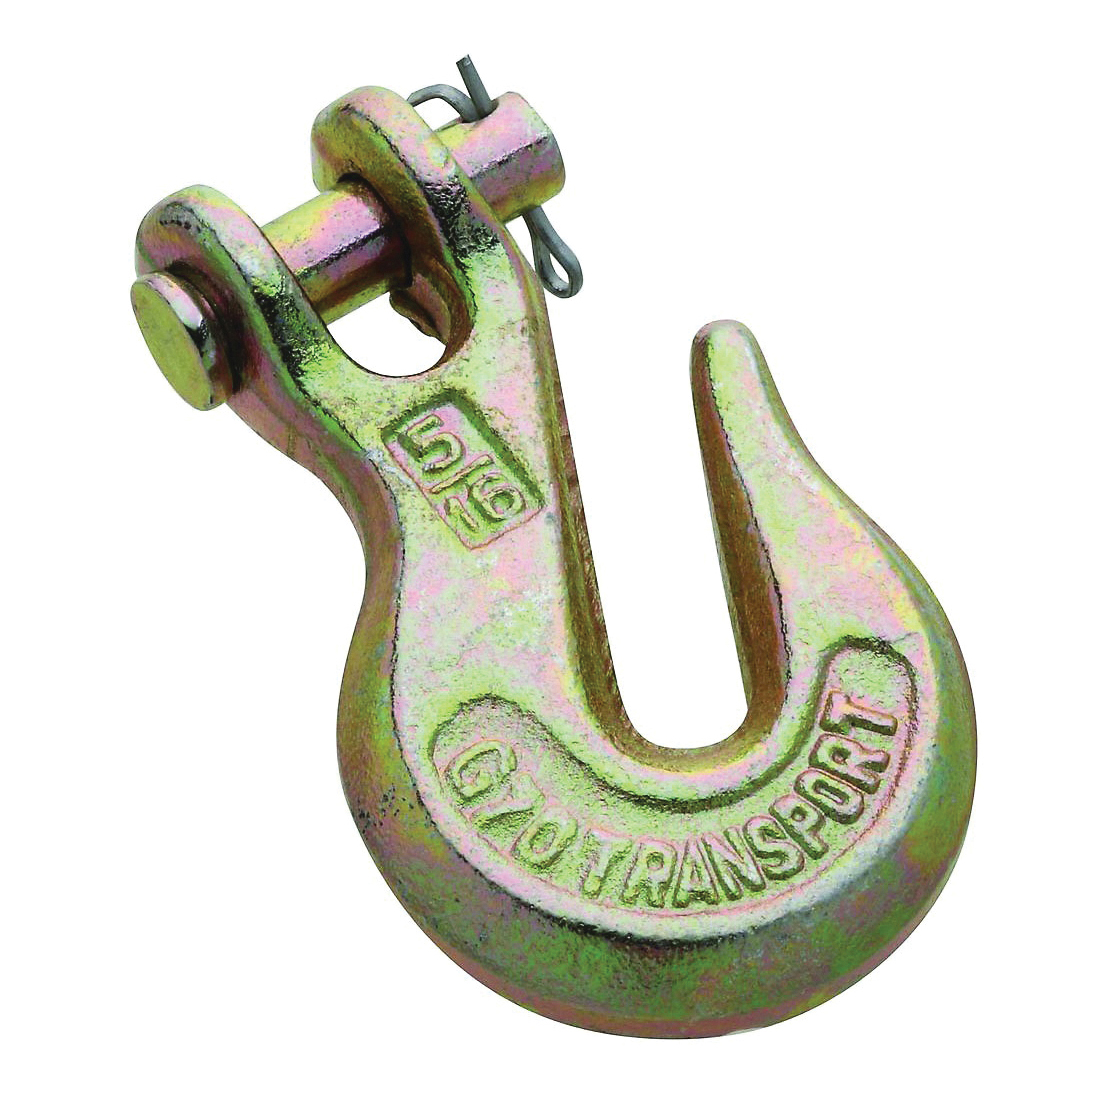 N282-087 Clevis Grab Hook, 5/16 in, 4700 lb Working Load, Steel, Yellow Chrome